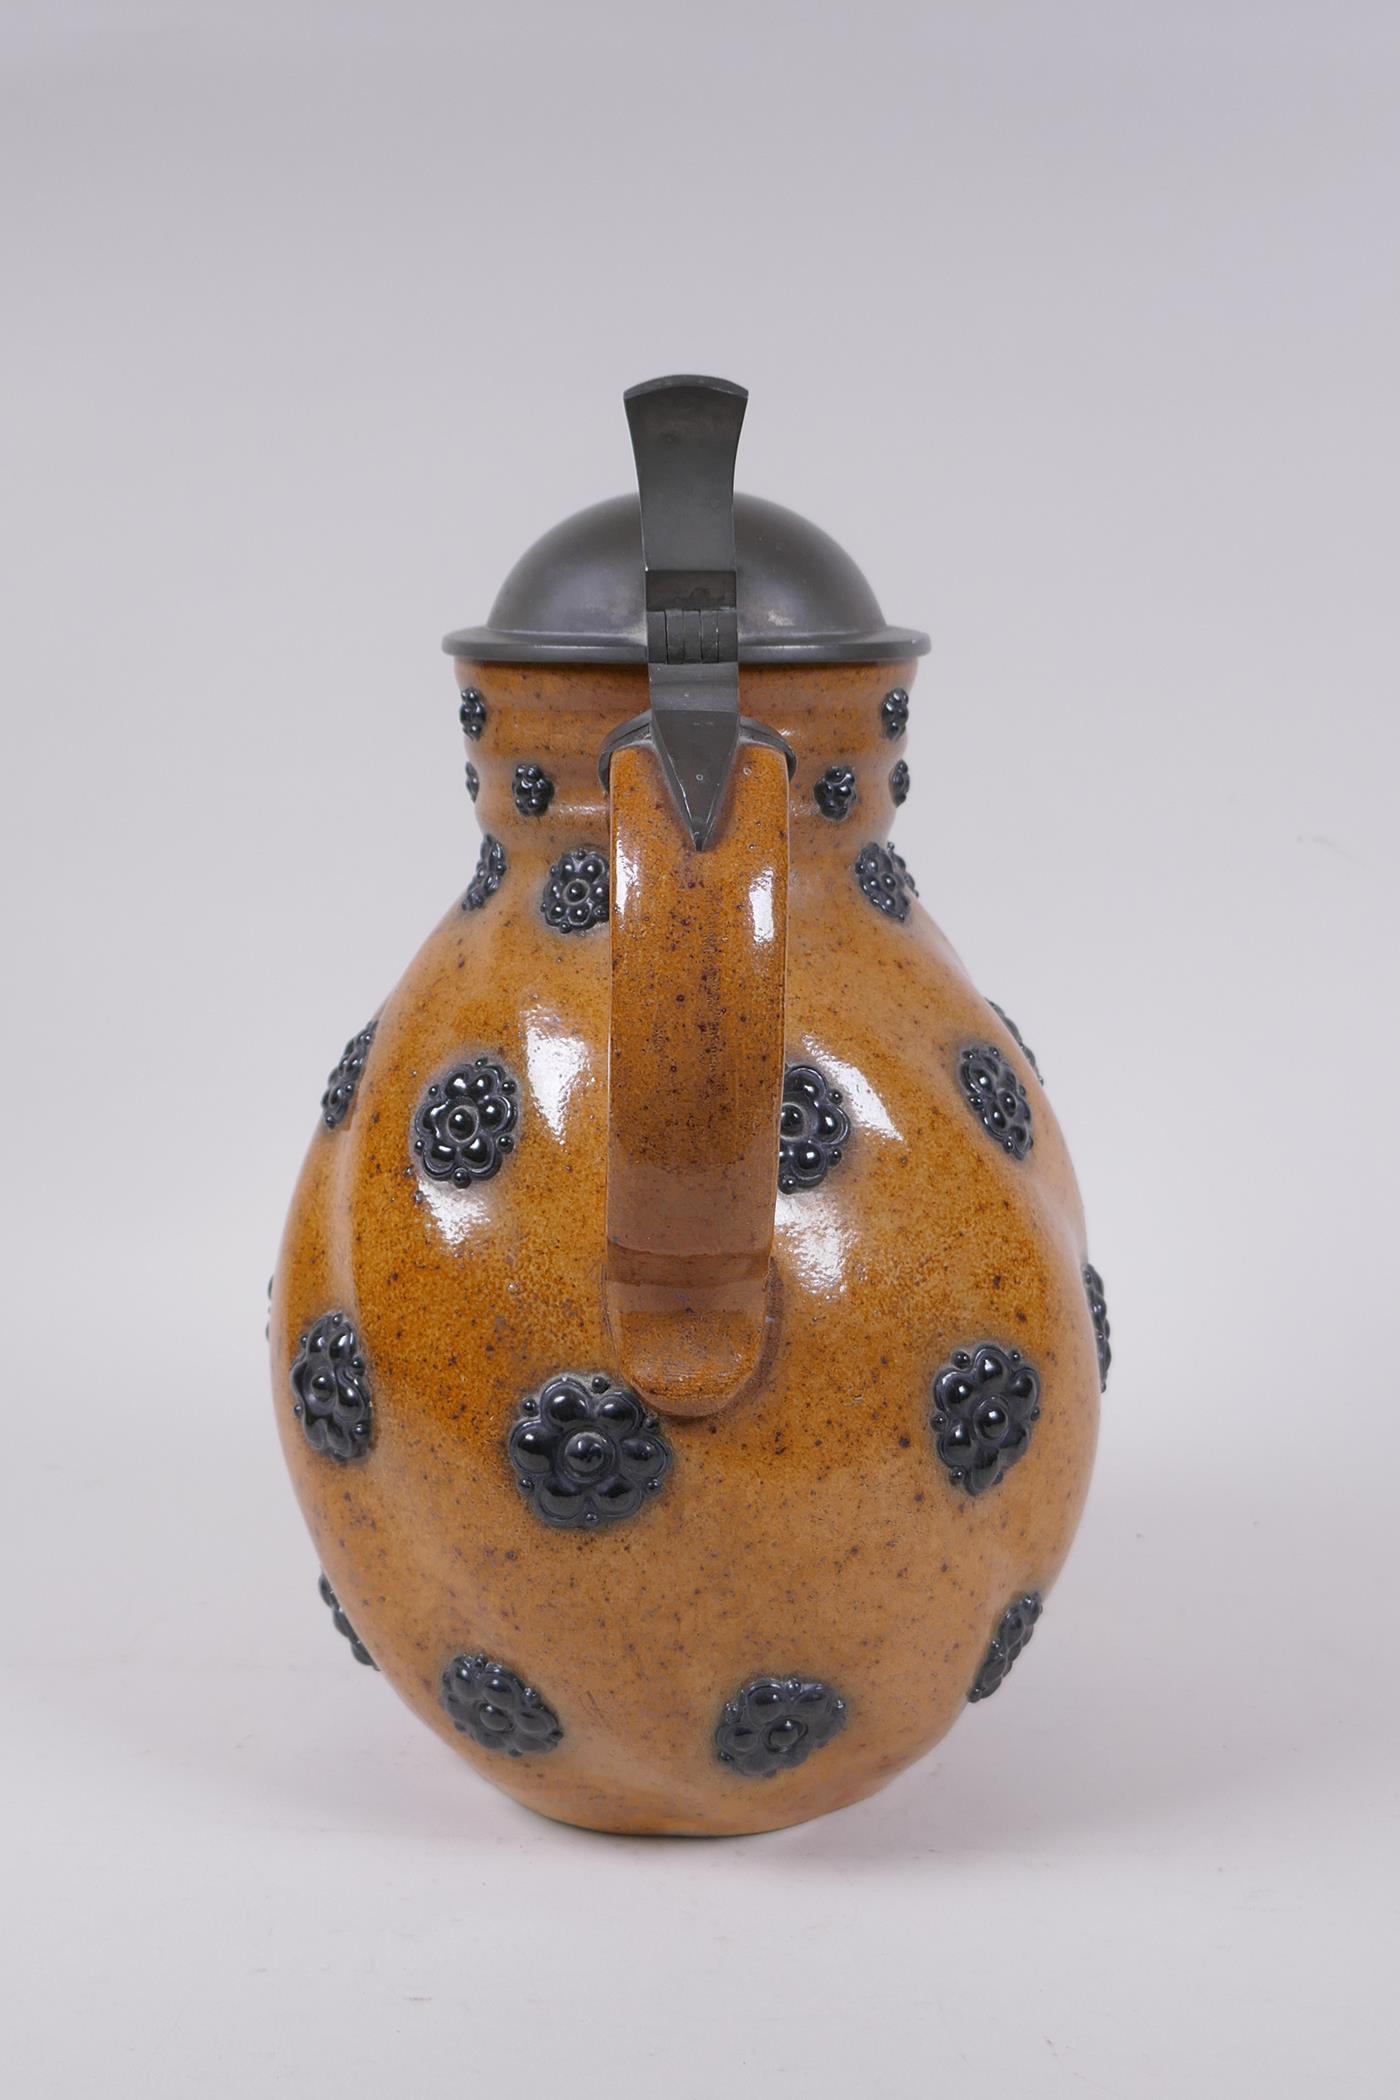 A German Reinheart Merkelbach stoneware art pottery pitcher of swirled form with applied floral - Image 5 of 8